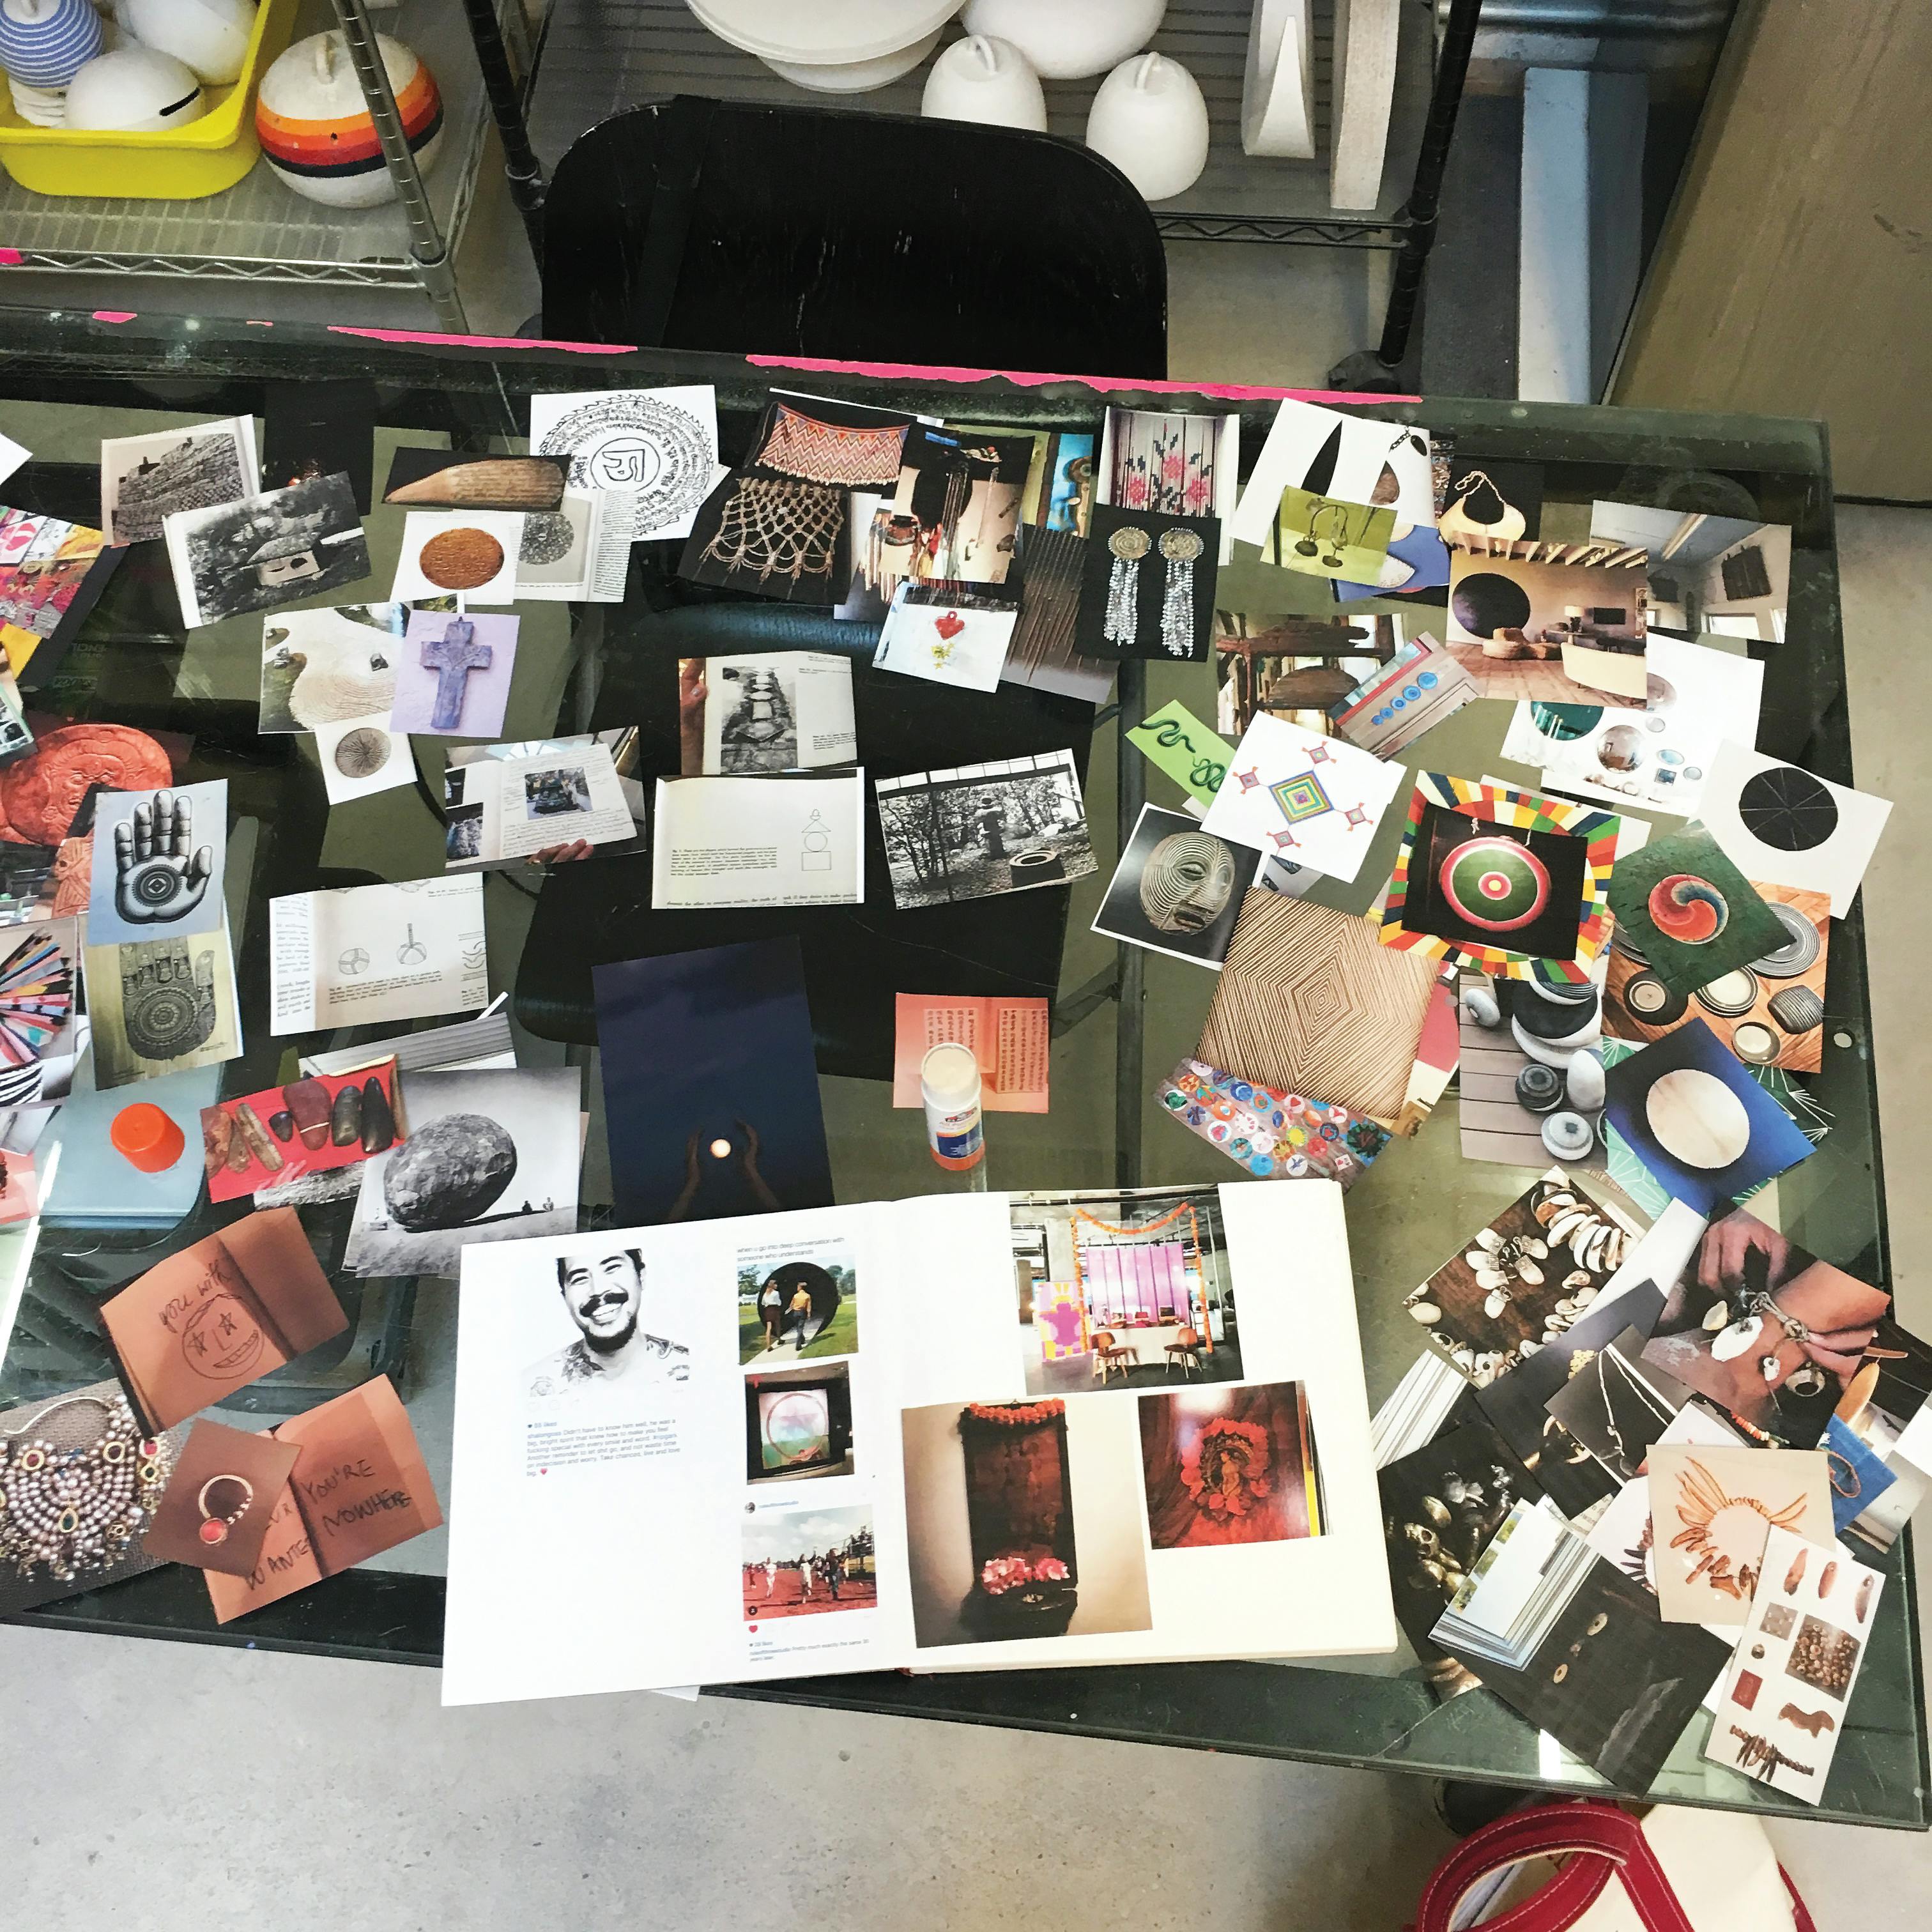 Miscellaneous photos and cutouts spread on a glass table